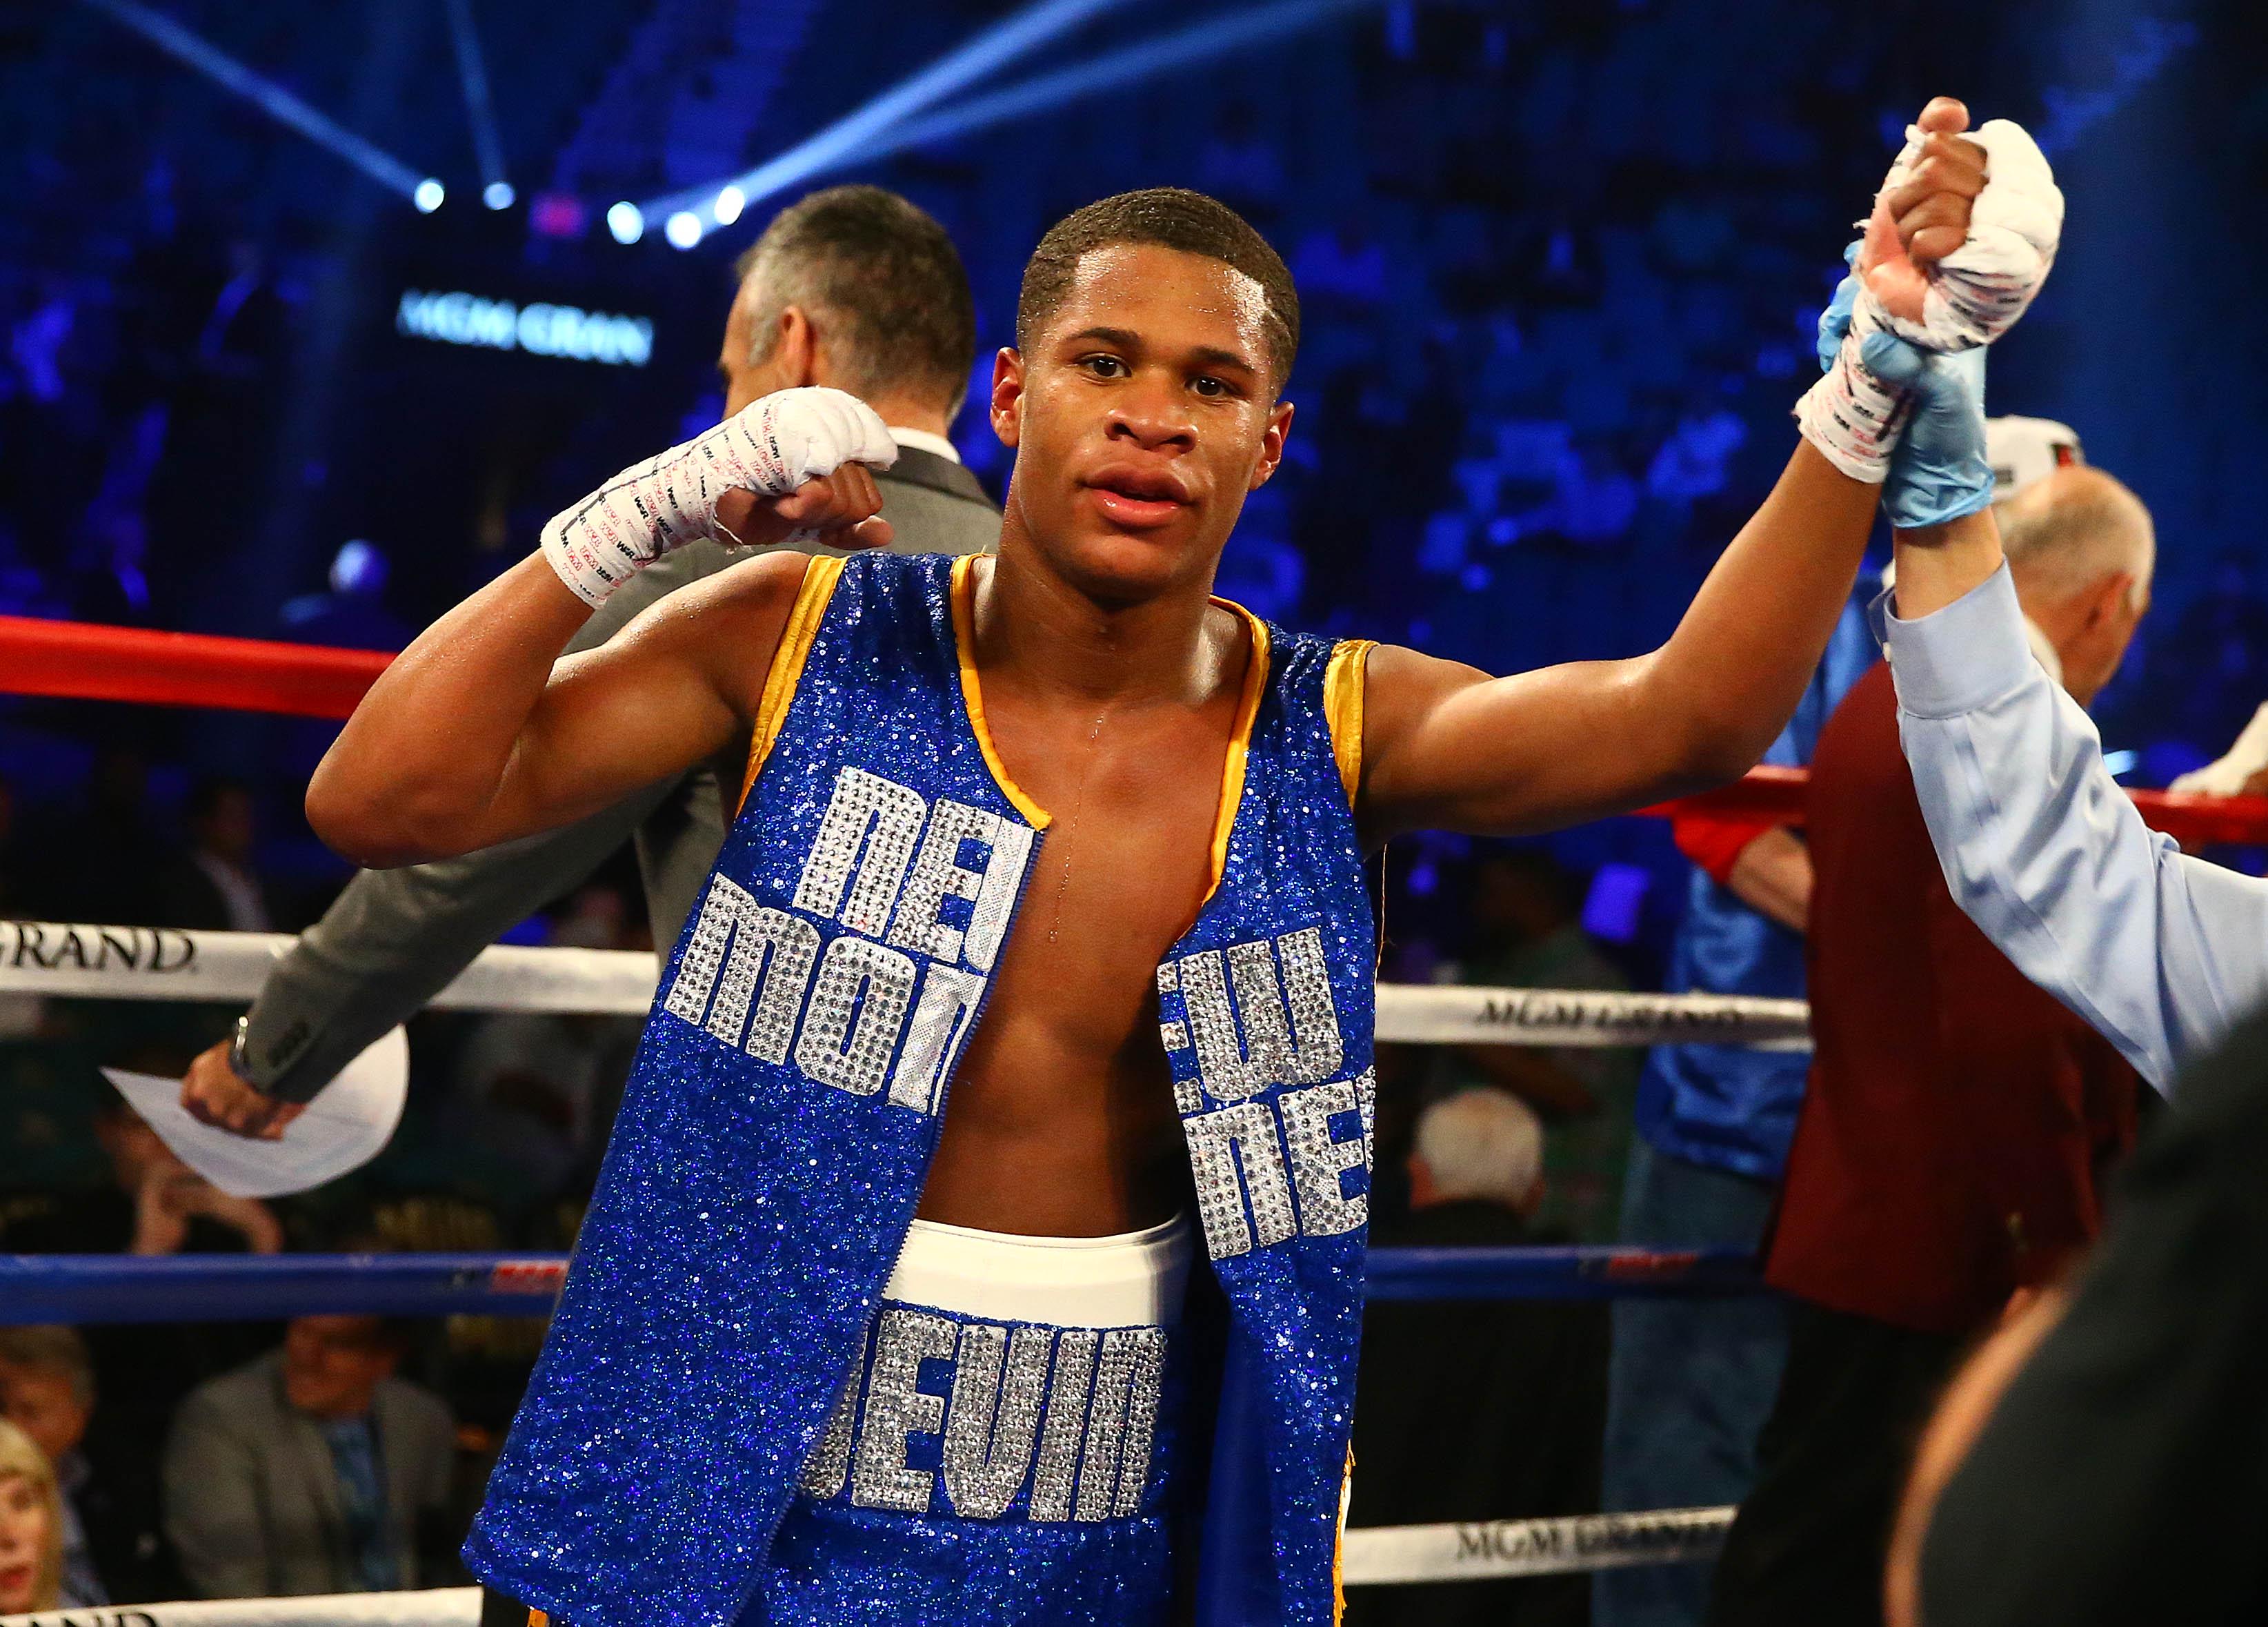 When is Devin Haney's Next Fight? George Kambosos vs Devin Haney Date & Odds